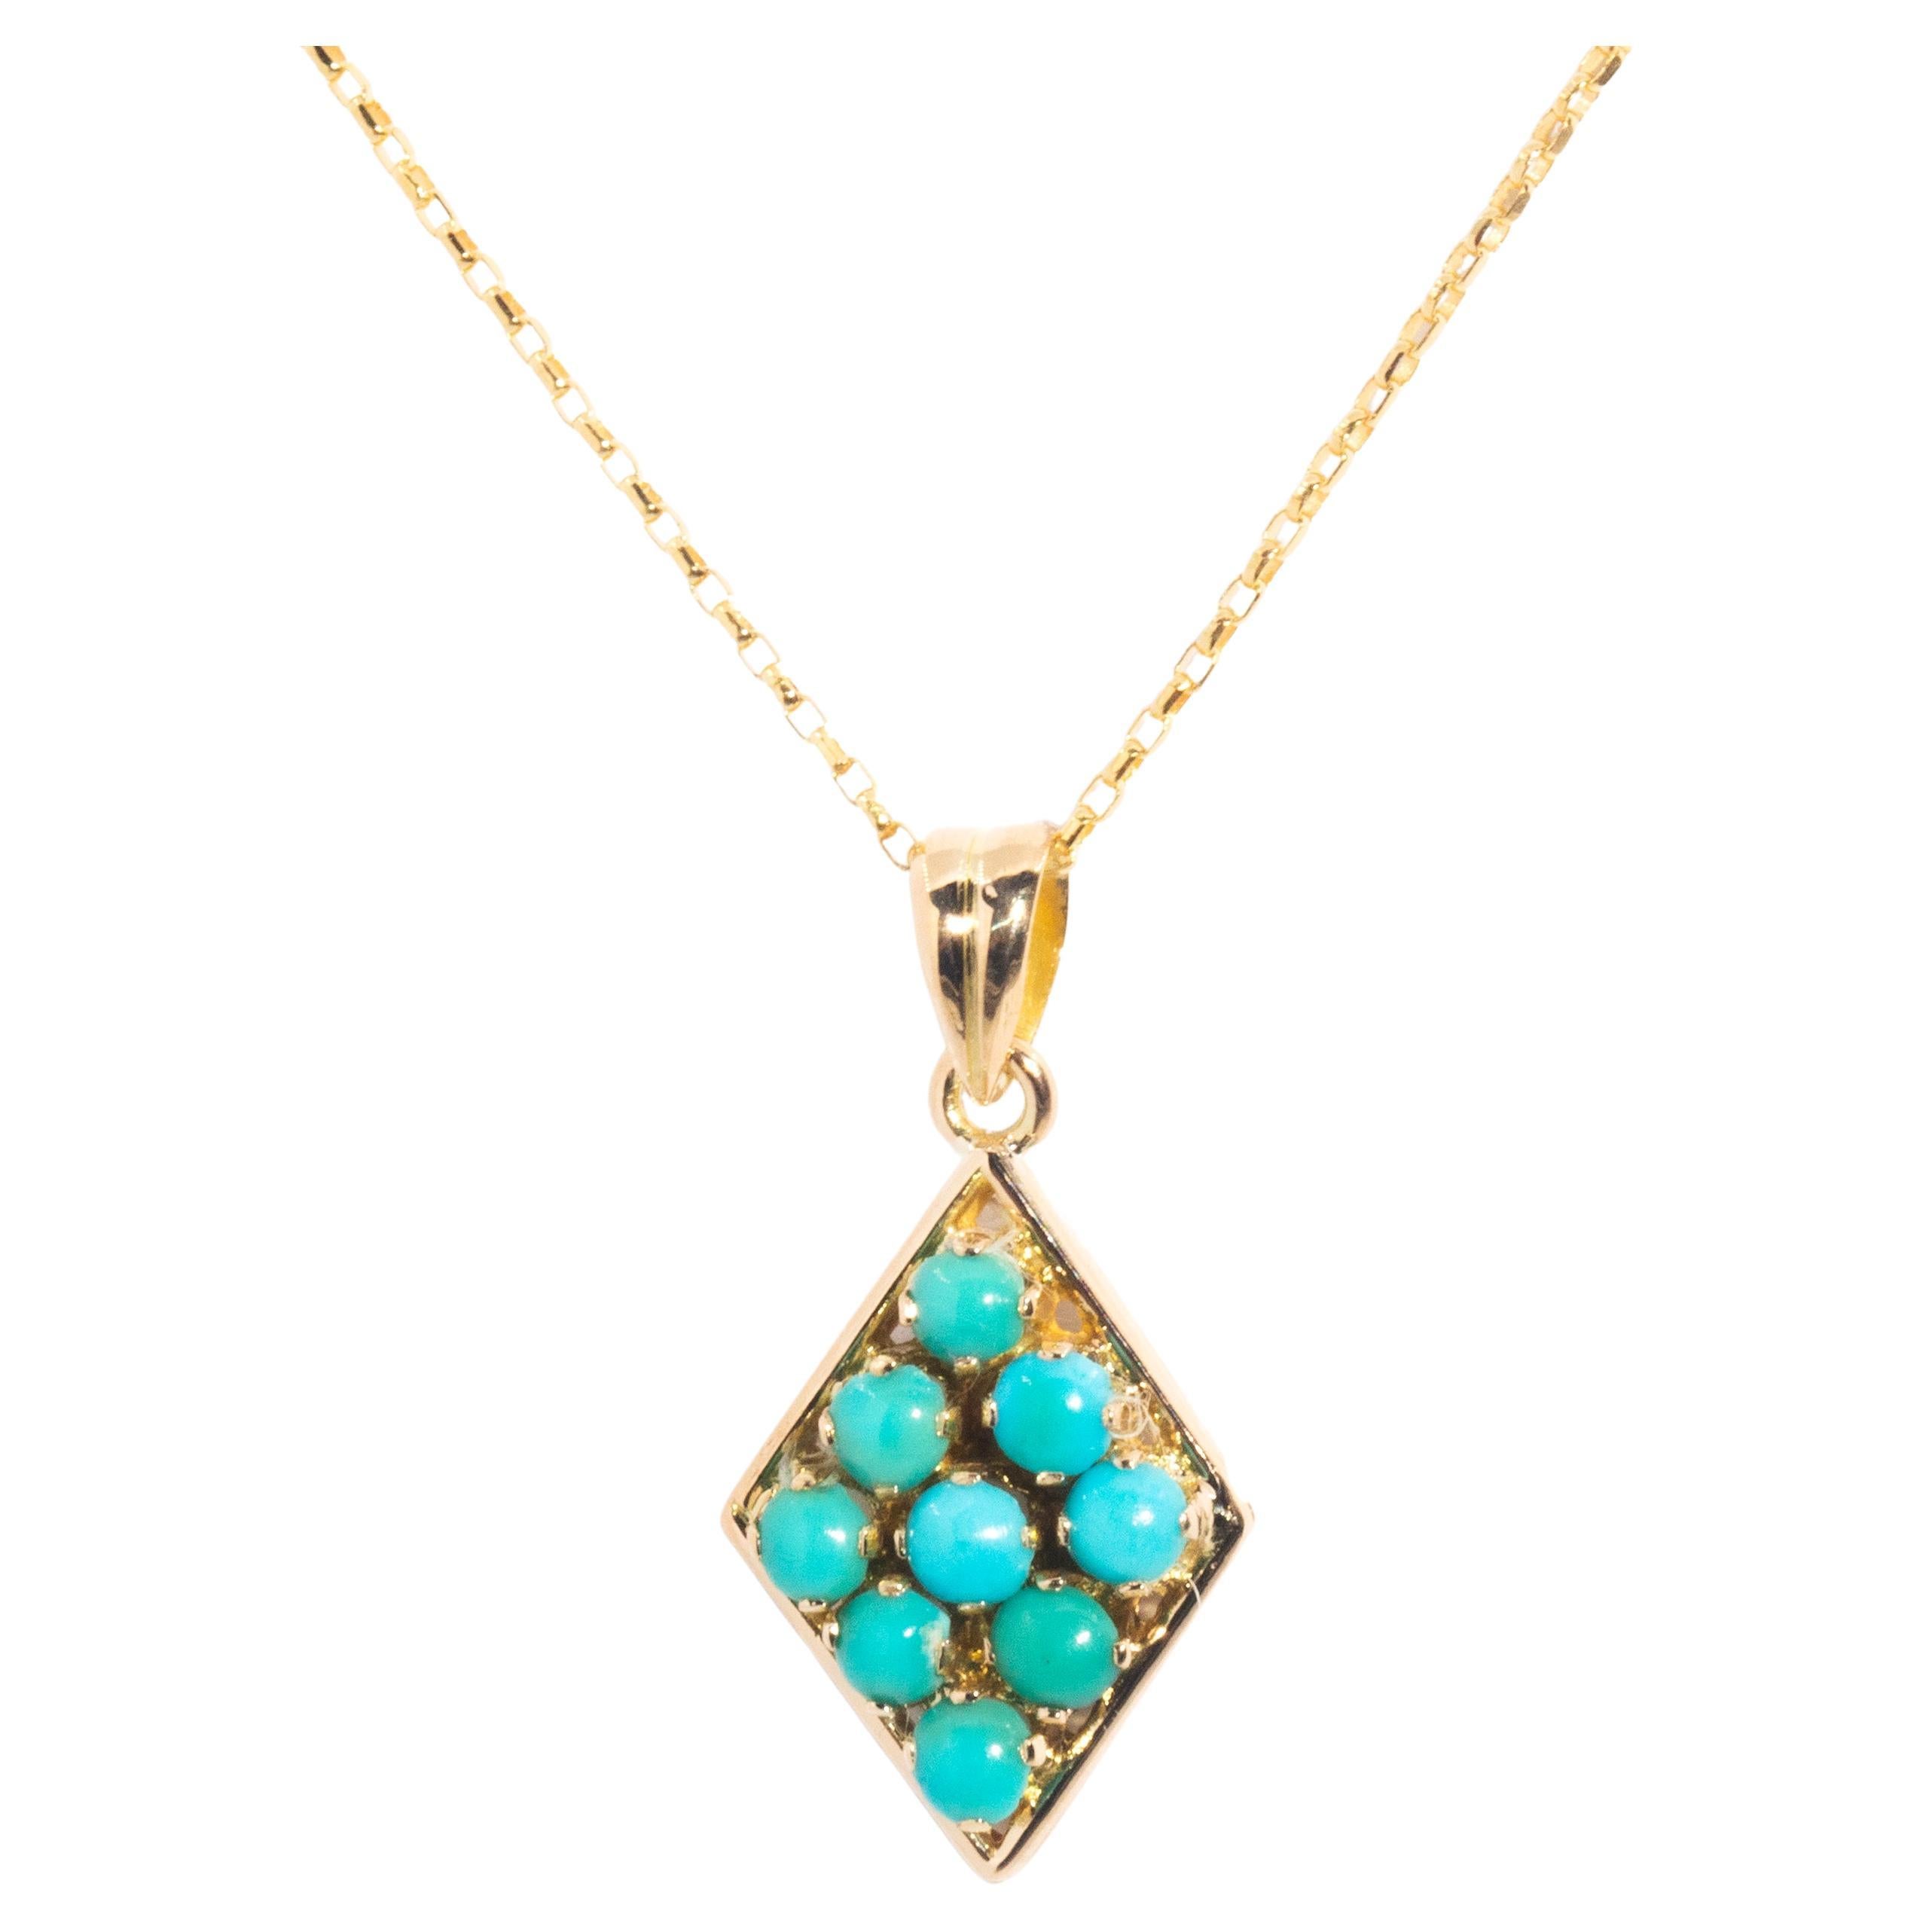 Vintage Circa 1970s 14 Carat Yellow Gold Turquoise Bead Pendant and Chain